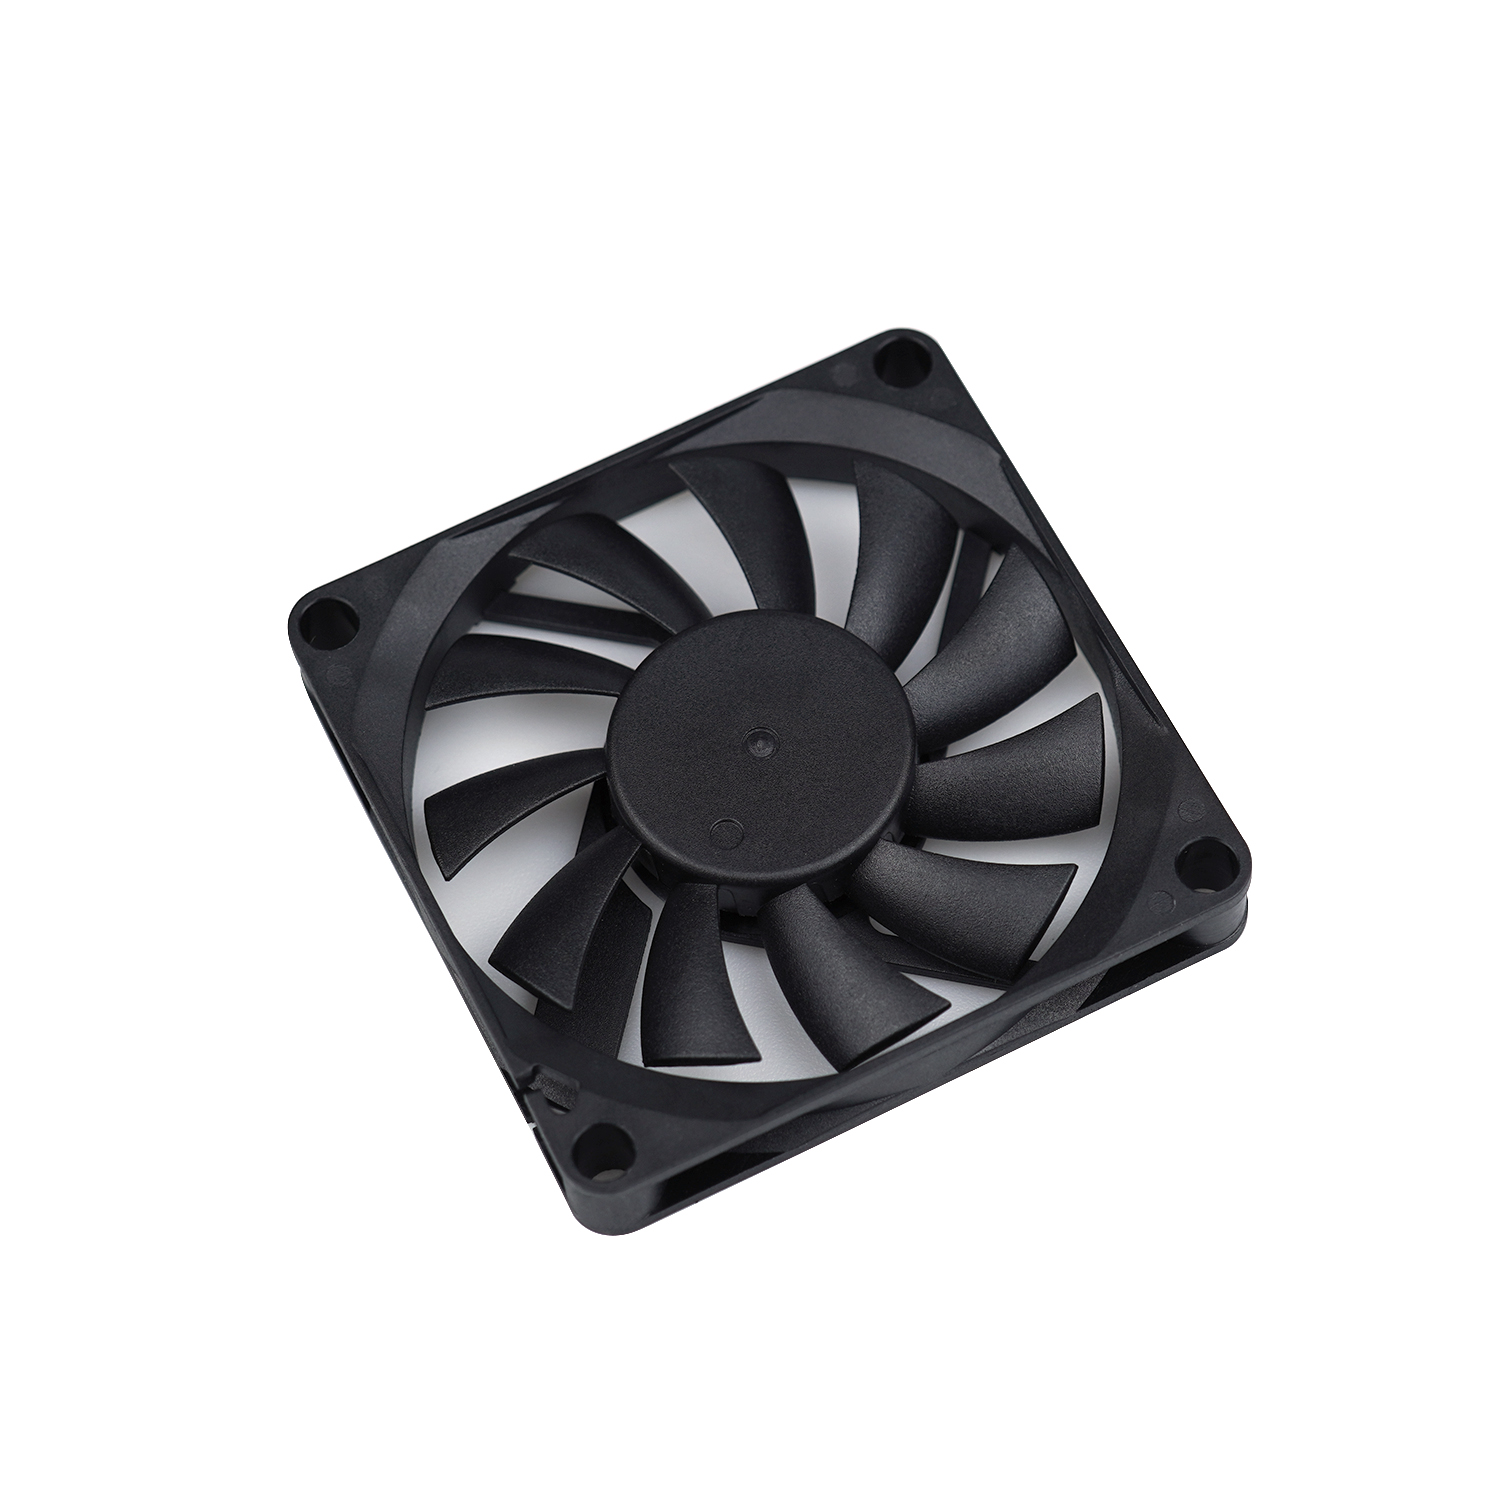 70mm low noise DC Axial Fan 12v for car